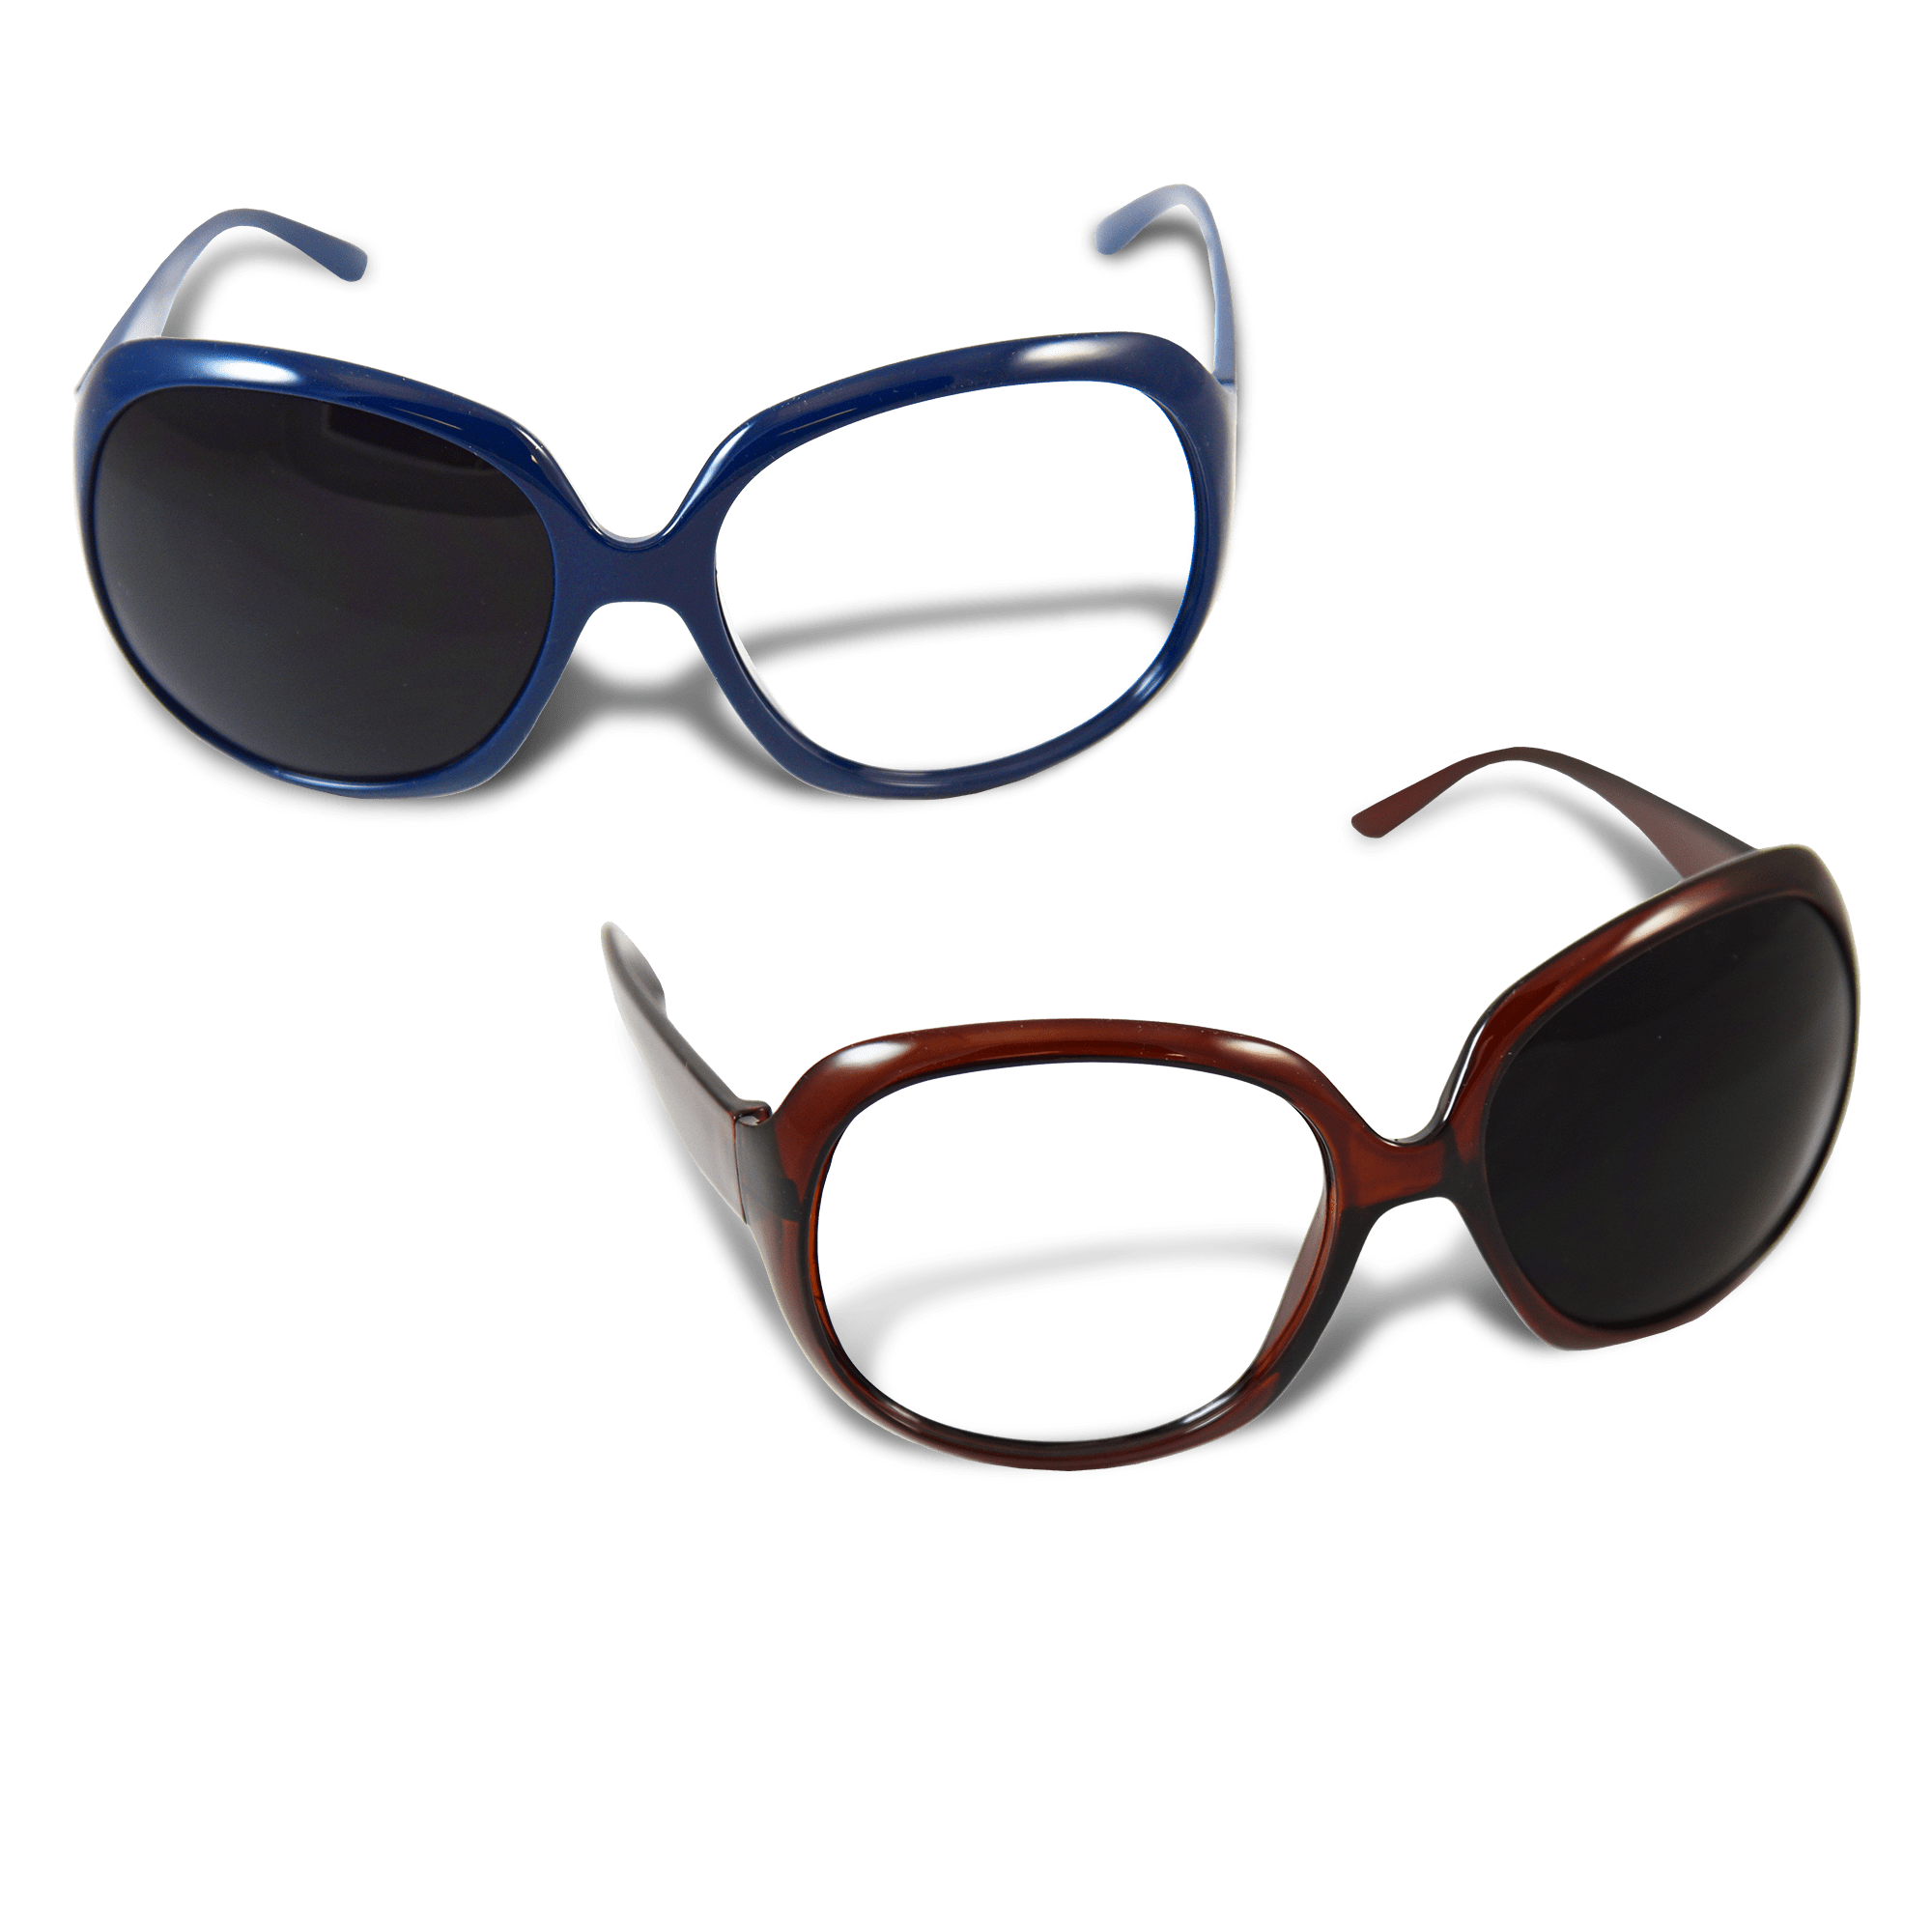 Good-Lite Adolescent and Adult Occluding Eye Glass Set